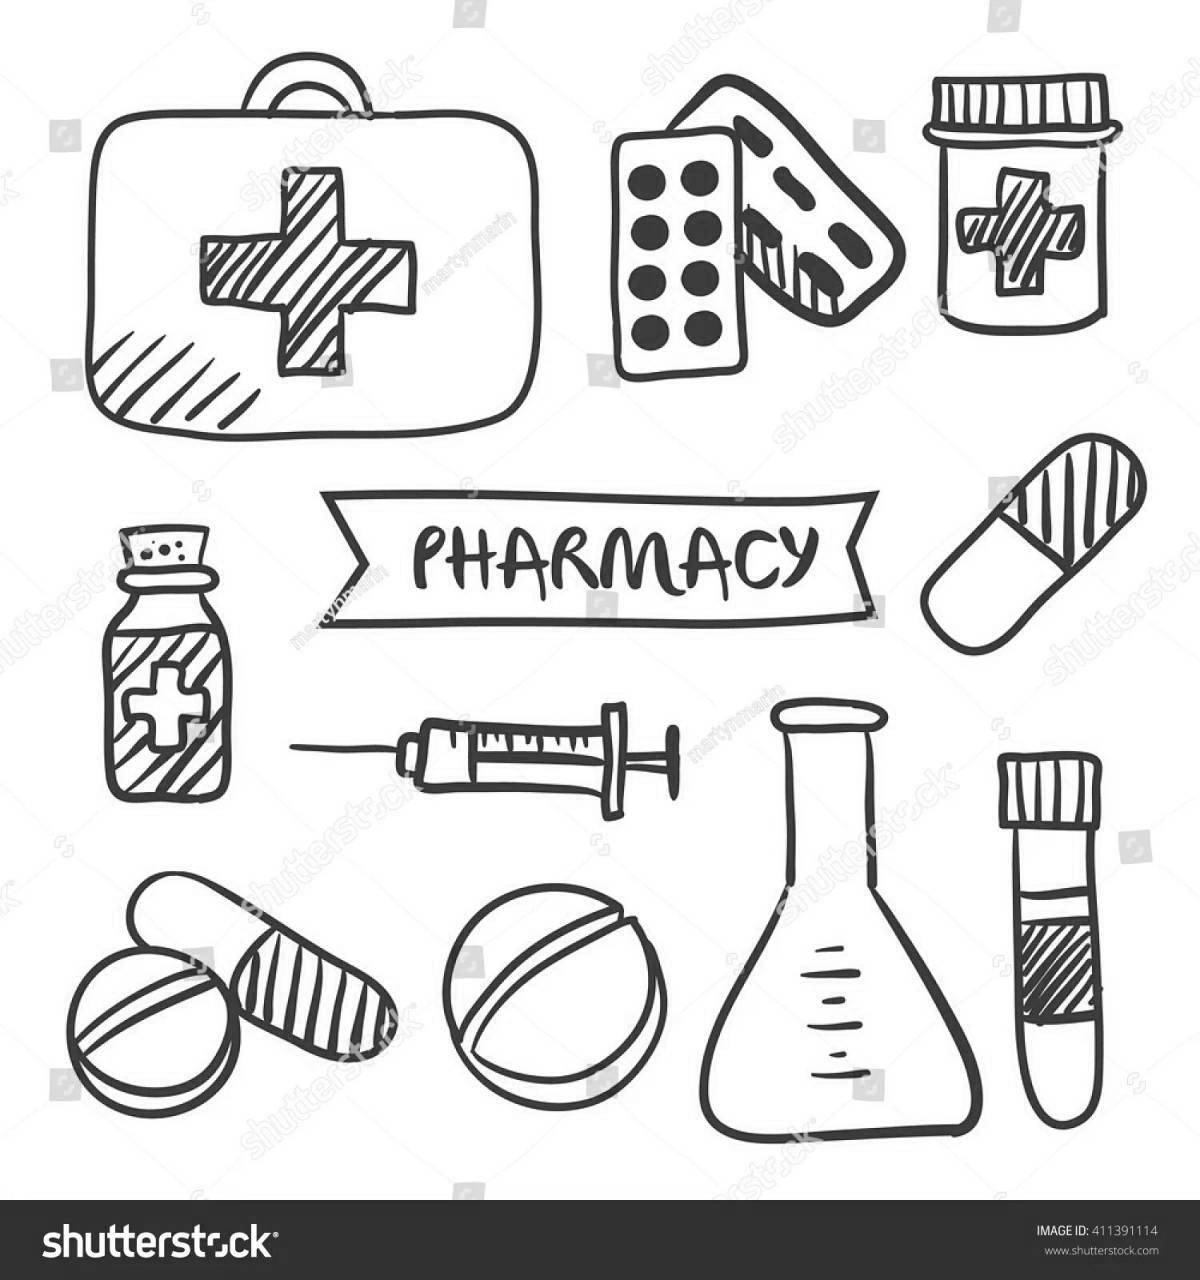 Charming pharmacy coloring book